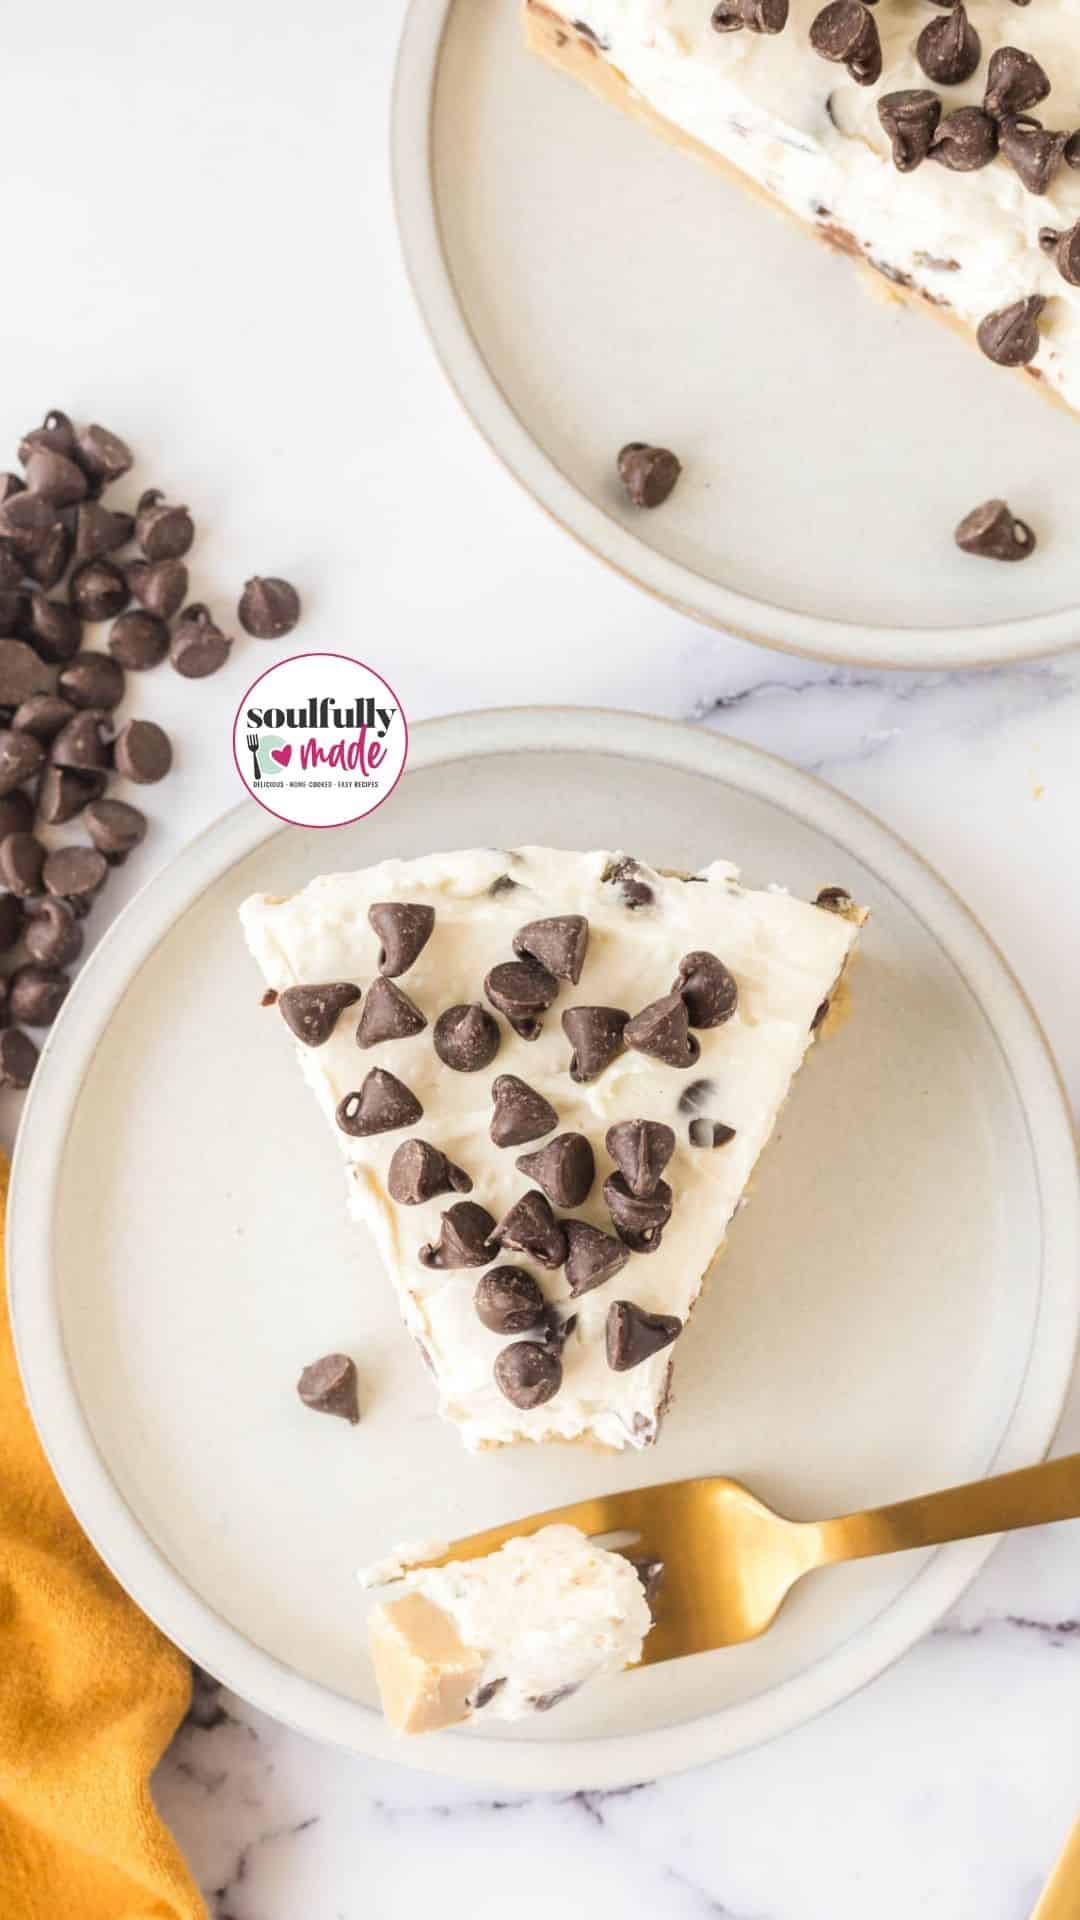 A slice of the delicious no-bake Cookie Dough Cheesecake topped with chocolate chips on a white plate. A gold fork has taken out a bite.